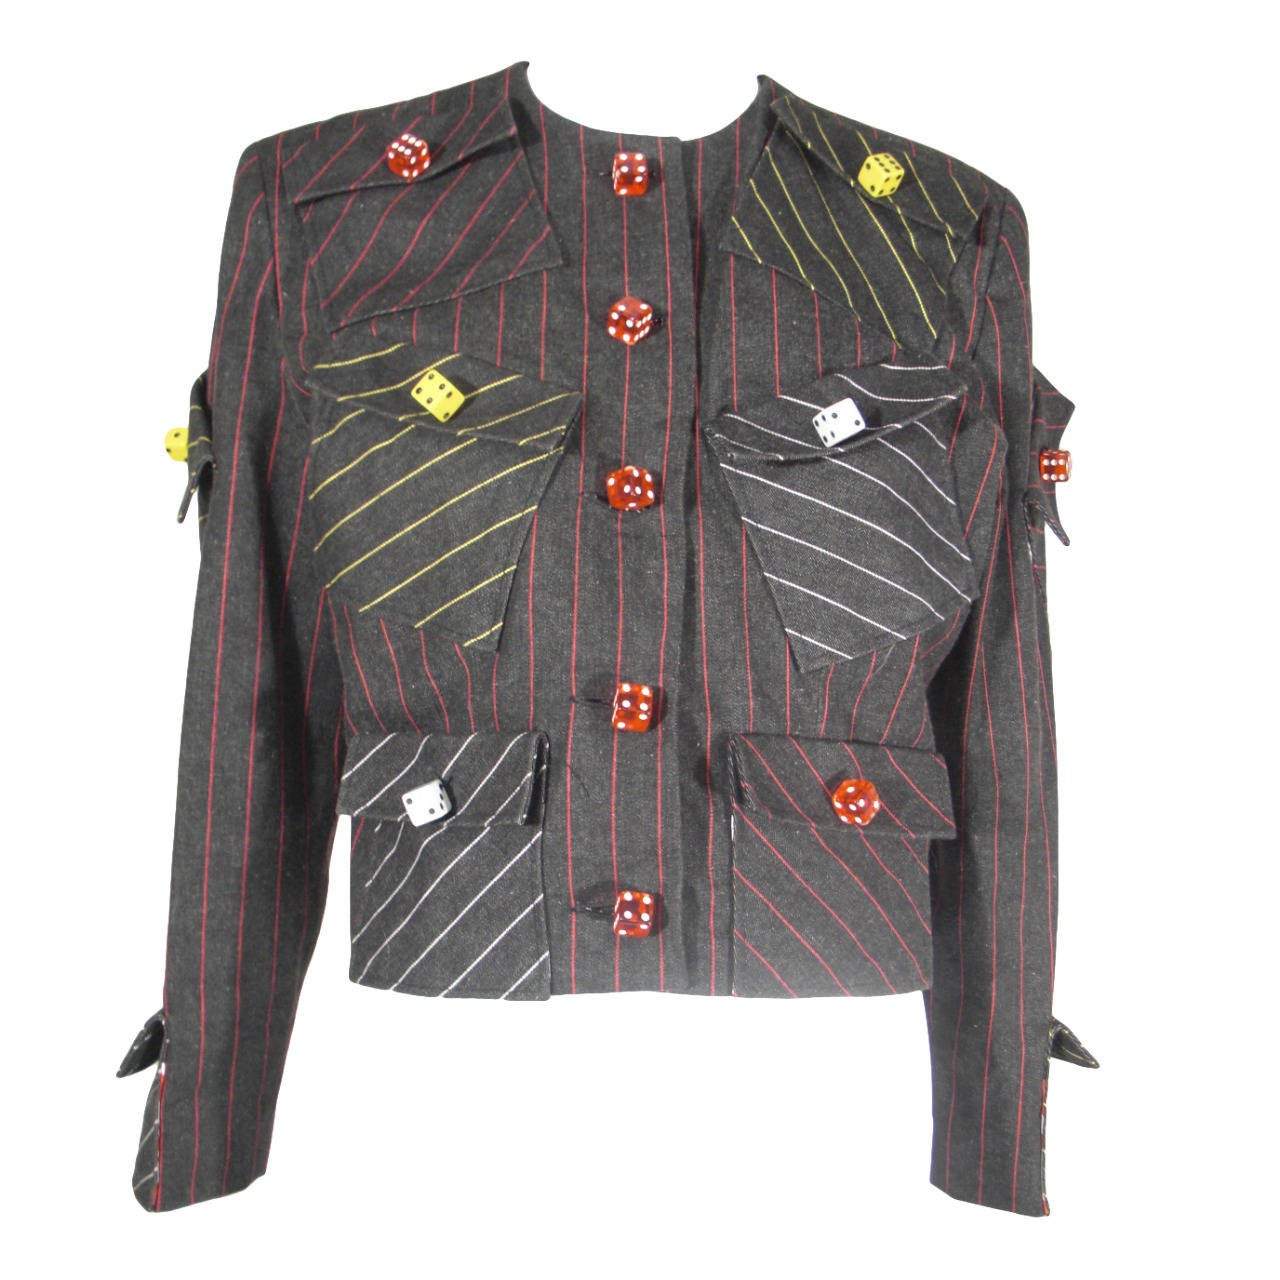 1980s Patrick Kelly "High Roller" Pinstripe Wool Jacket with Lucite Dice Detail